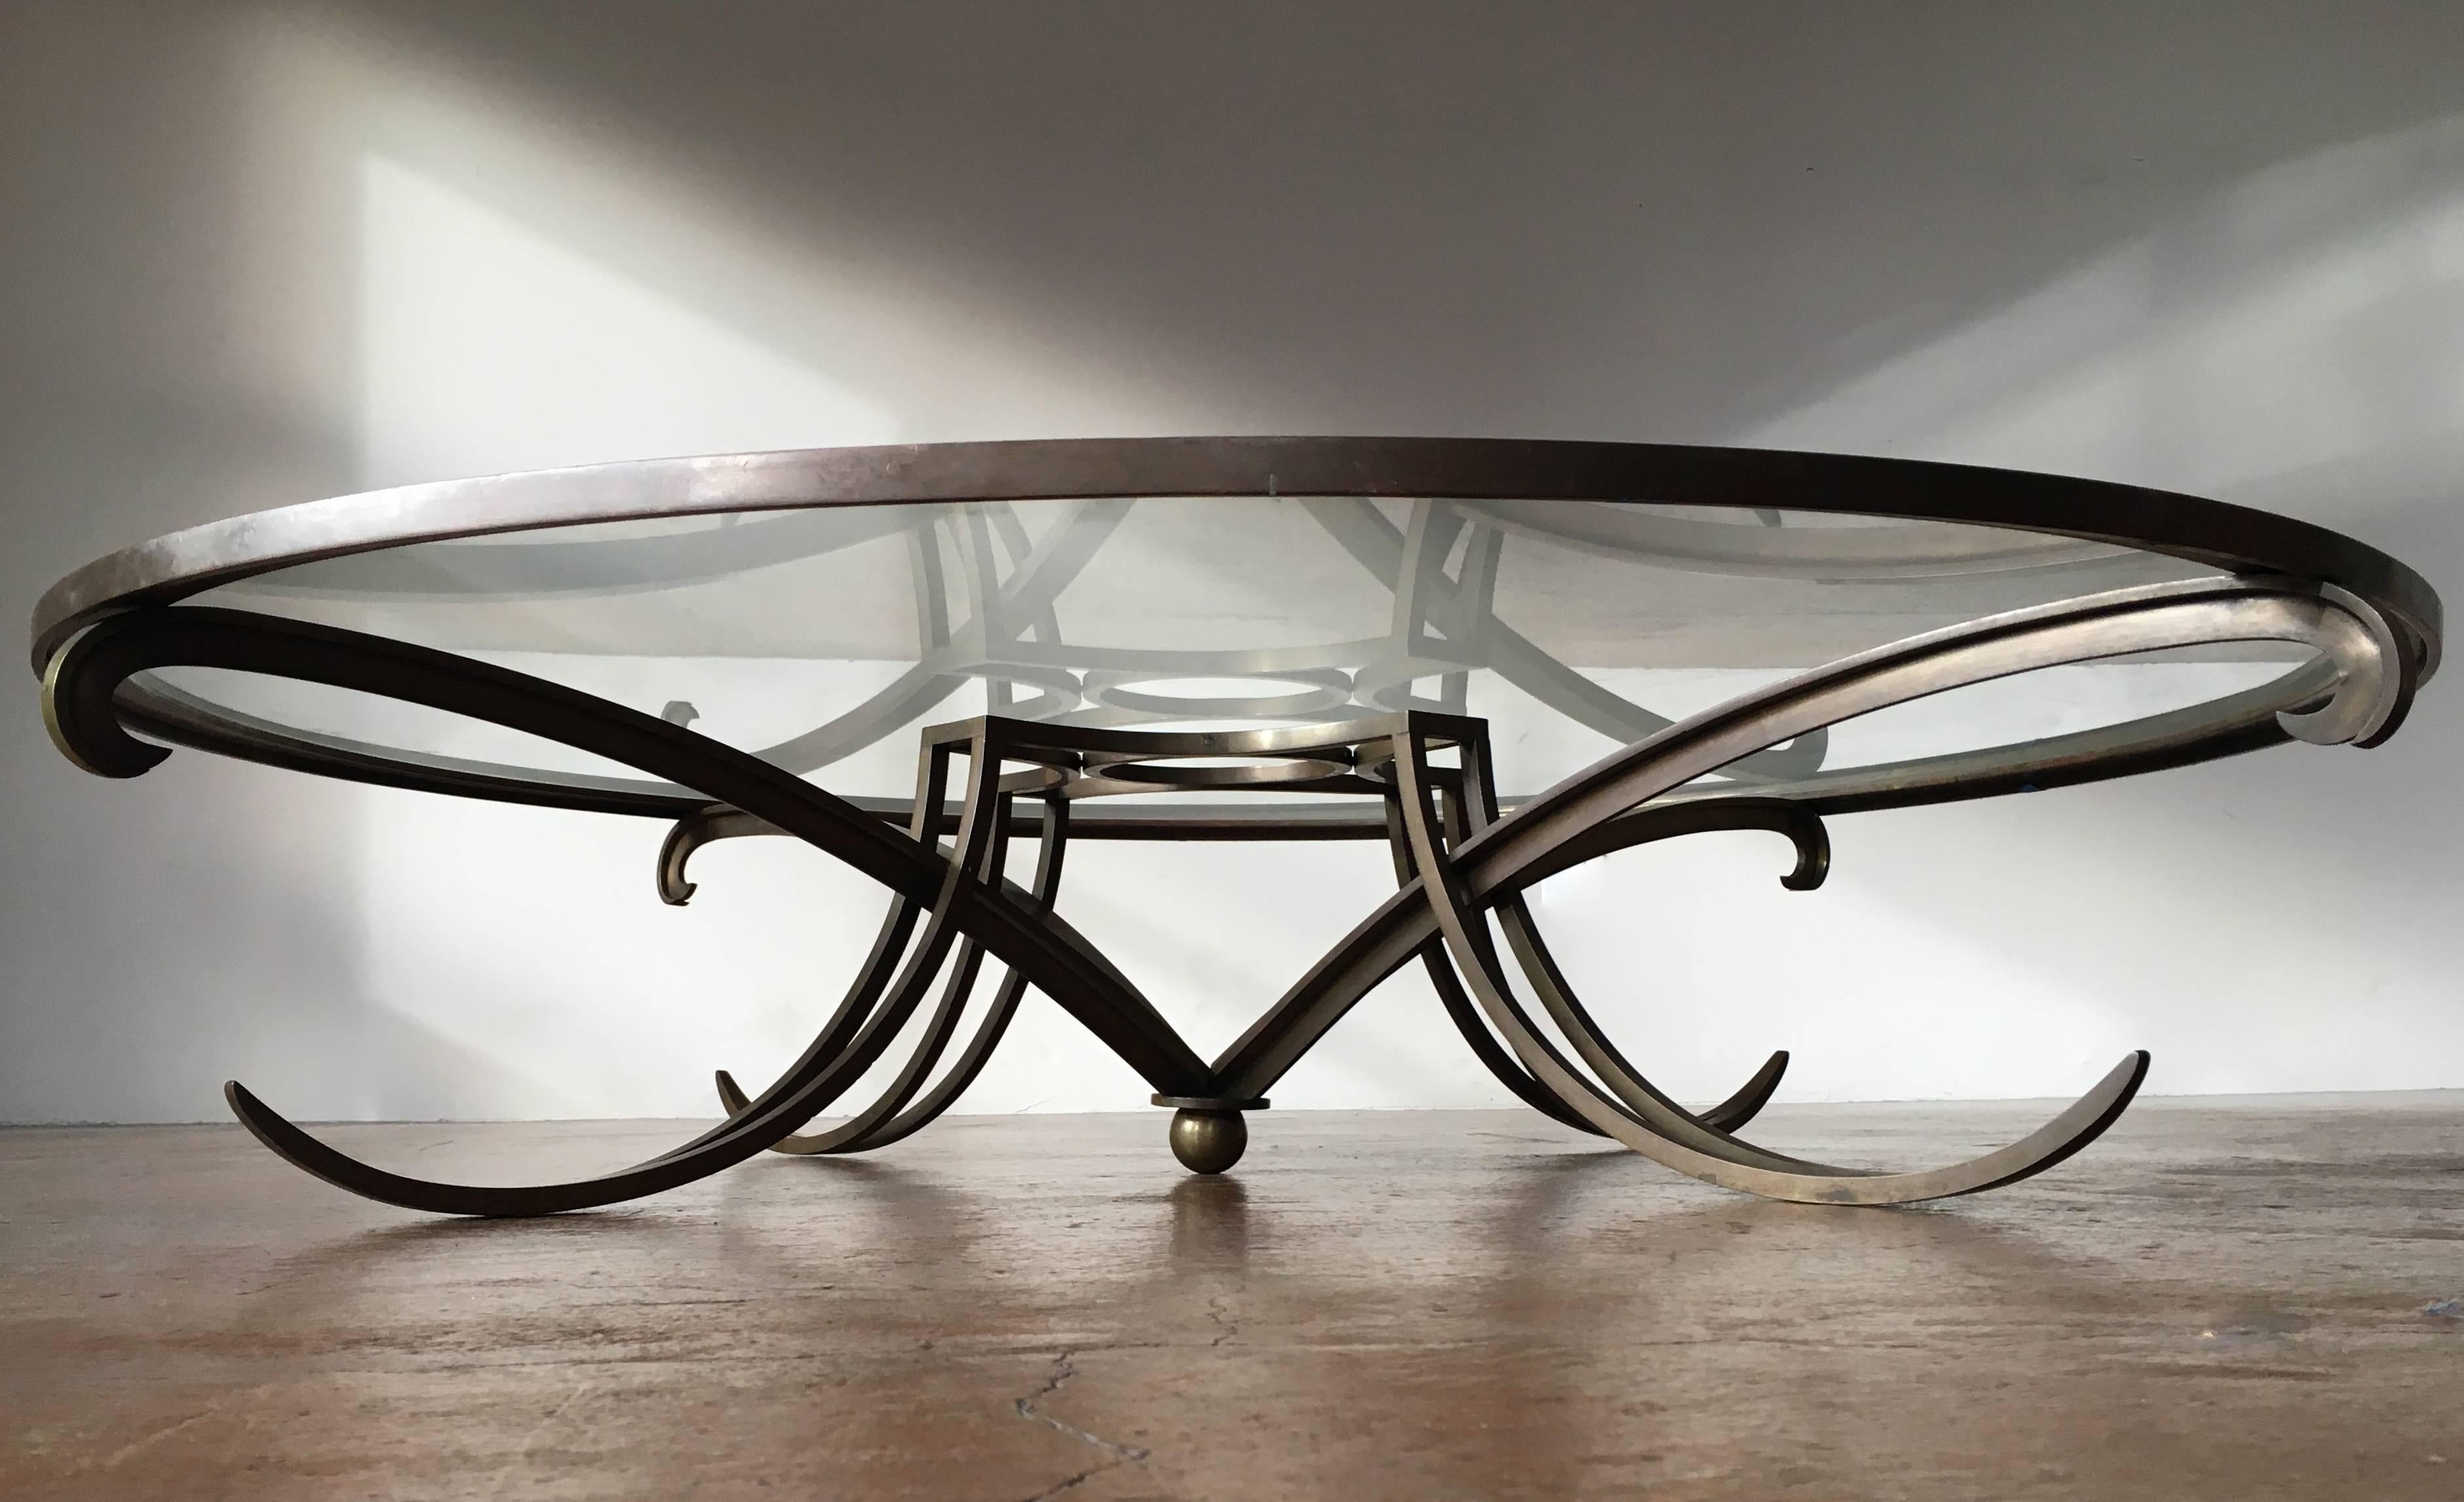 Stunning and rare solid brass or bronze, sculptural coffee table,
by Arturo Pani, Mexico City, circa 1950.

